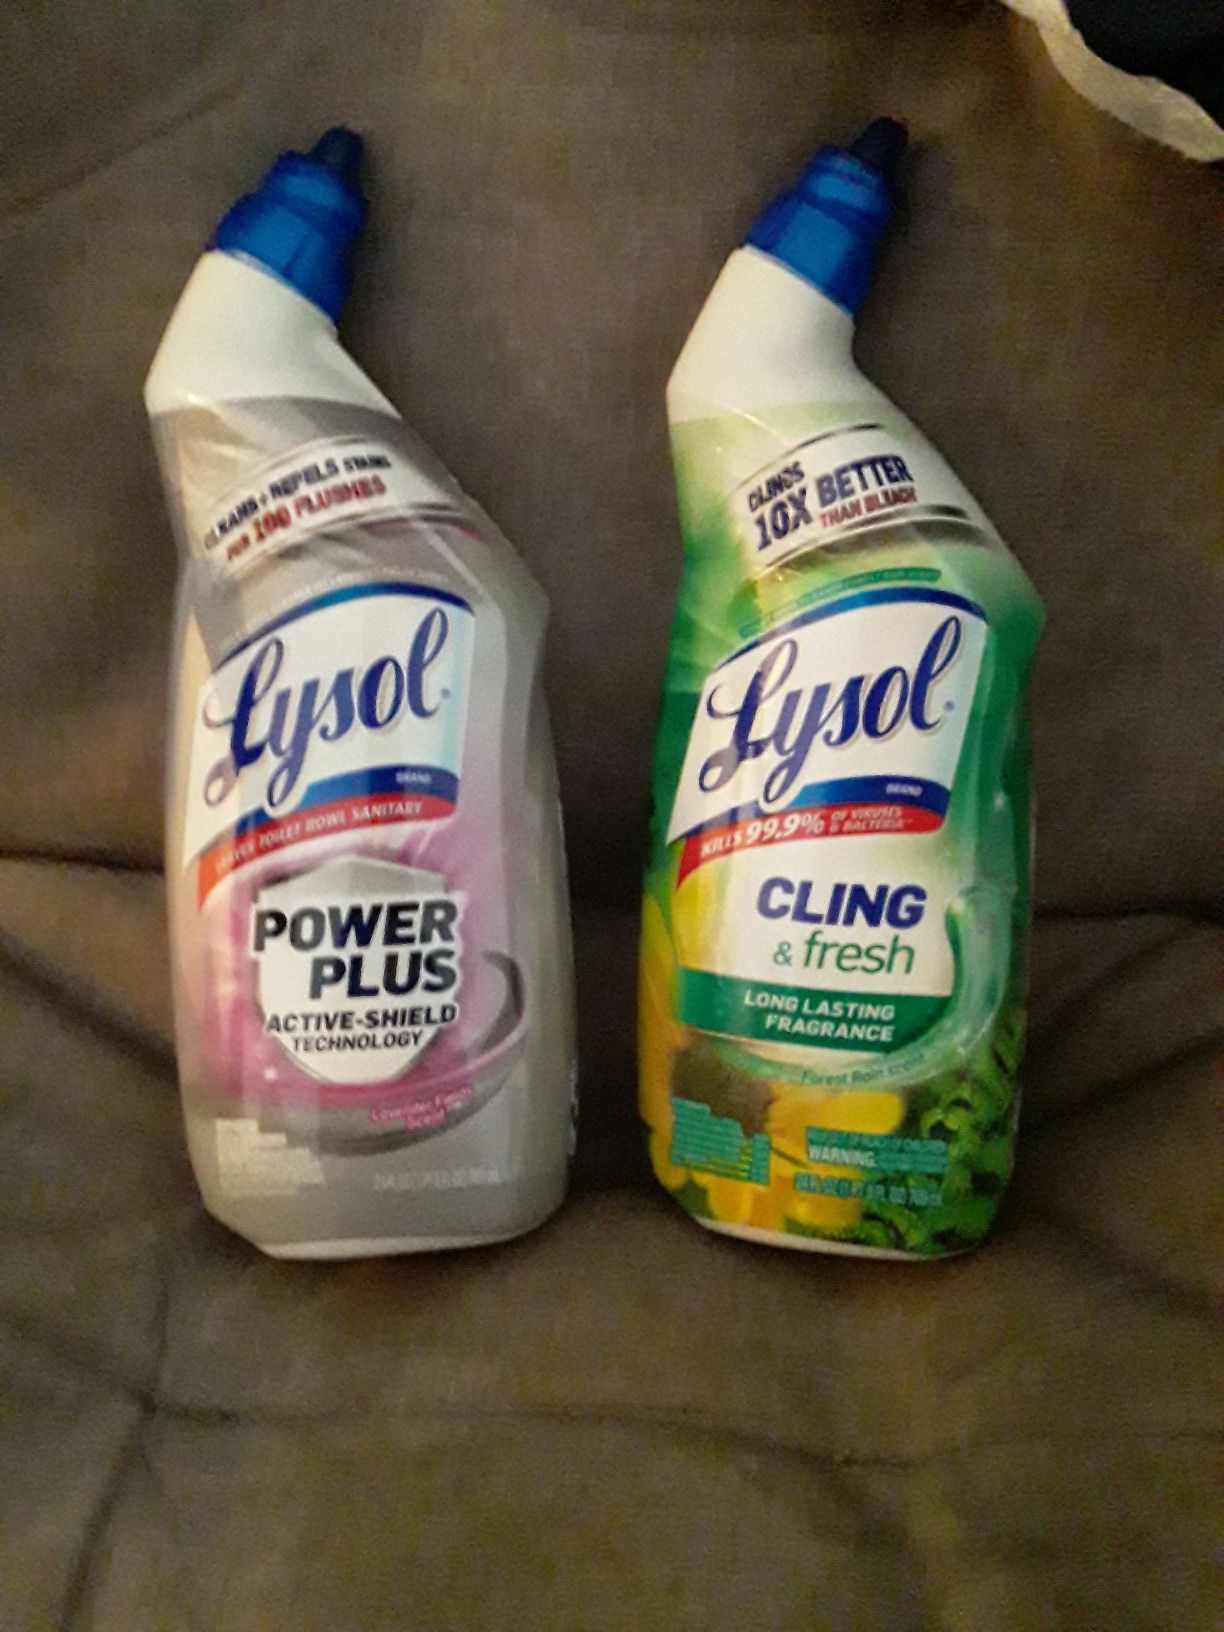 Lot of 2 Lysol Toilet Bowl Cleaner - Brand New